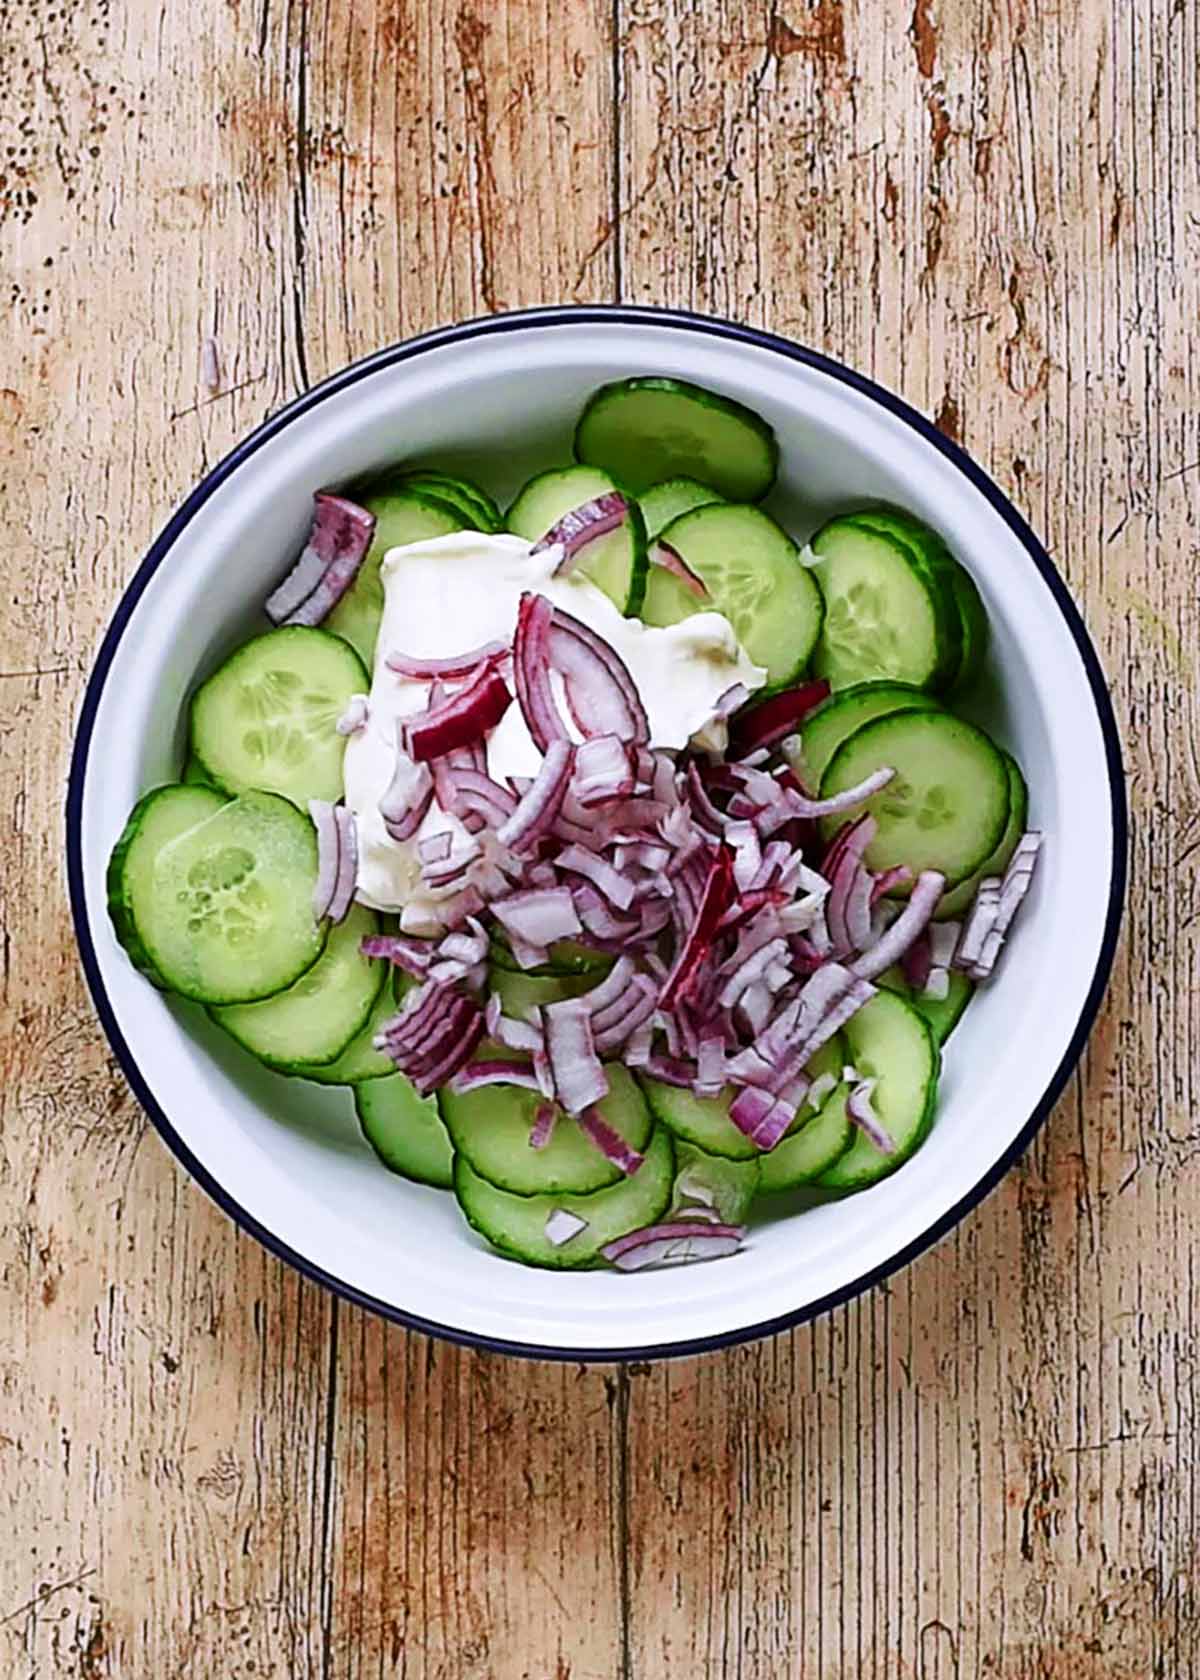 A bowl of cucumber slices with chopped red onion and a dollop of sour cream.